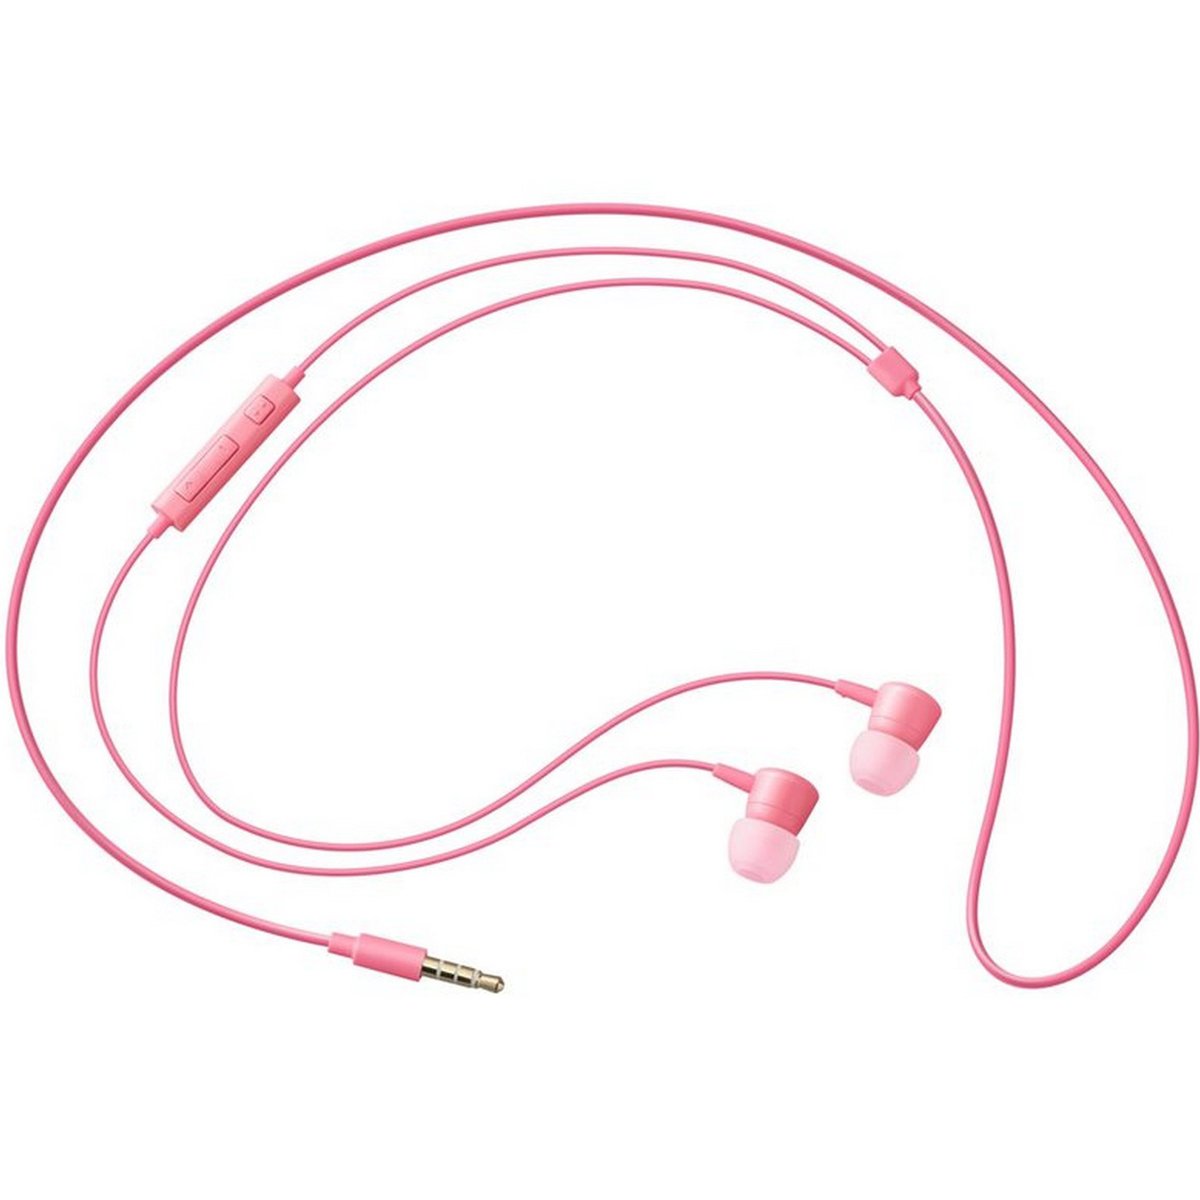 Samsung HS1303 Earphone With Mic HS1303PEGWW Pink